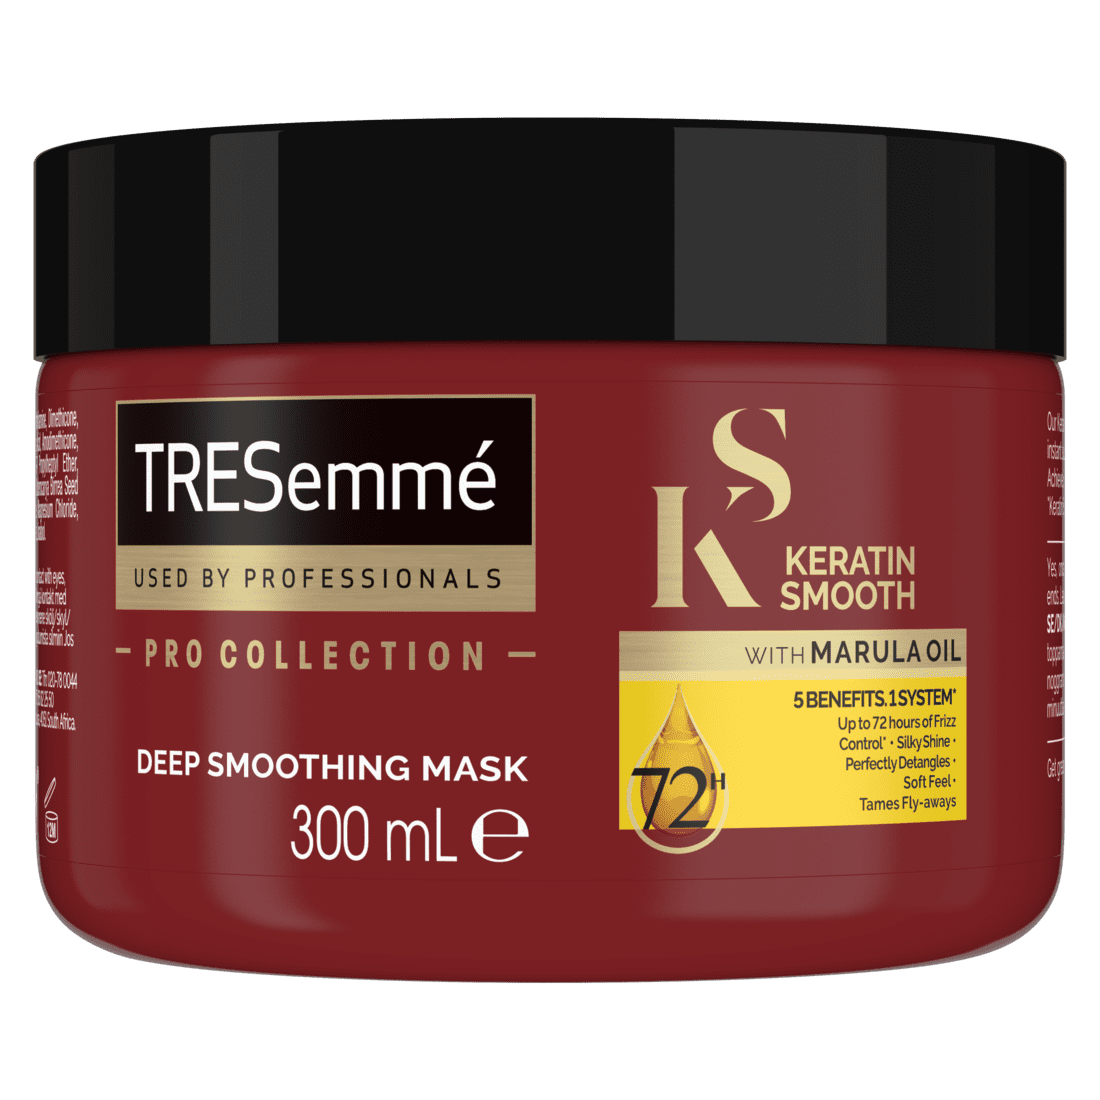 A 300ml tub of TRESemmé Keratin Smooth Mask front of pack image